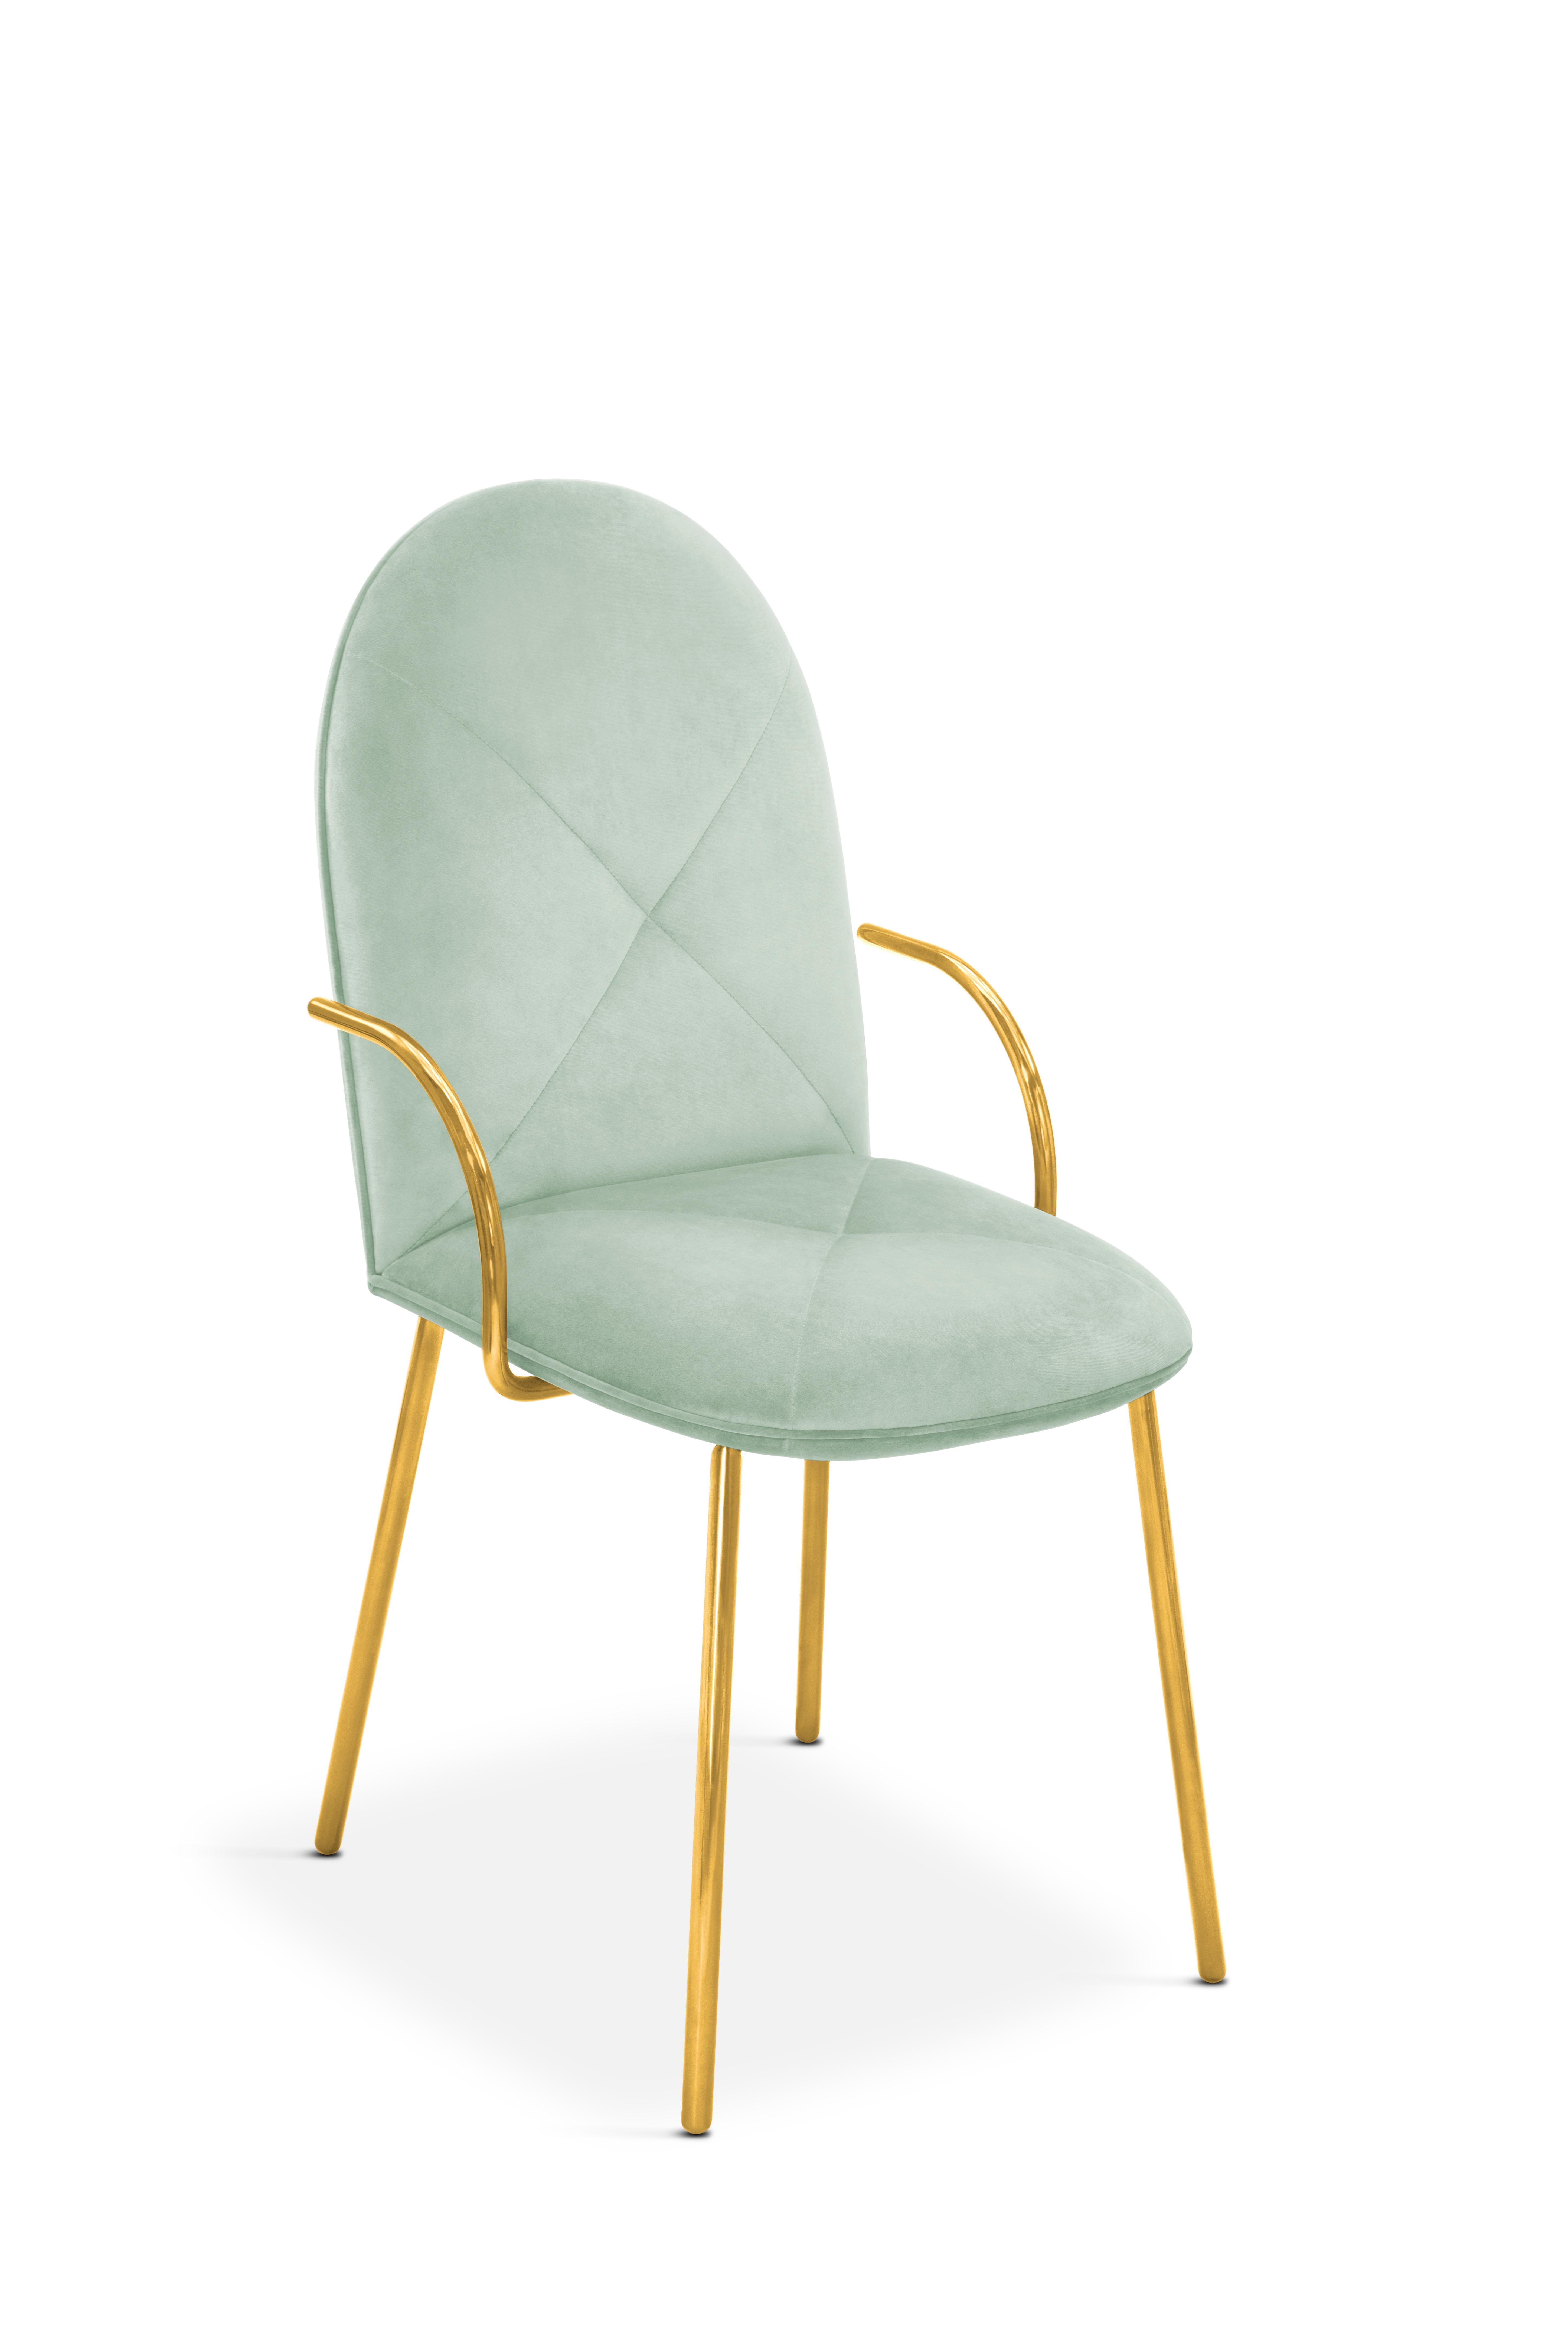 Orion Dining Chair with Plush Mint Green Velvet and Gold Arms by Nika Zupanc is a beautiful chair in pale green velvet and gold metal. Used as an accent or dining chair, it is stylish and comfortable.

Nika Zupanc, a strikingly renowned Slovenian